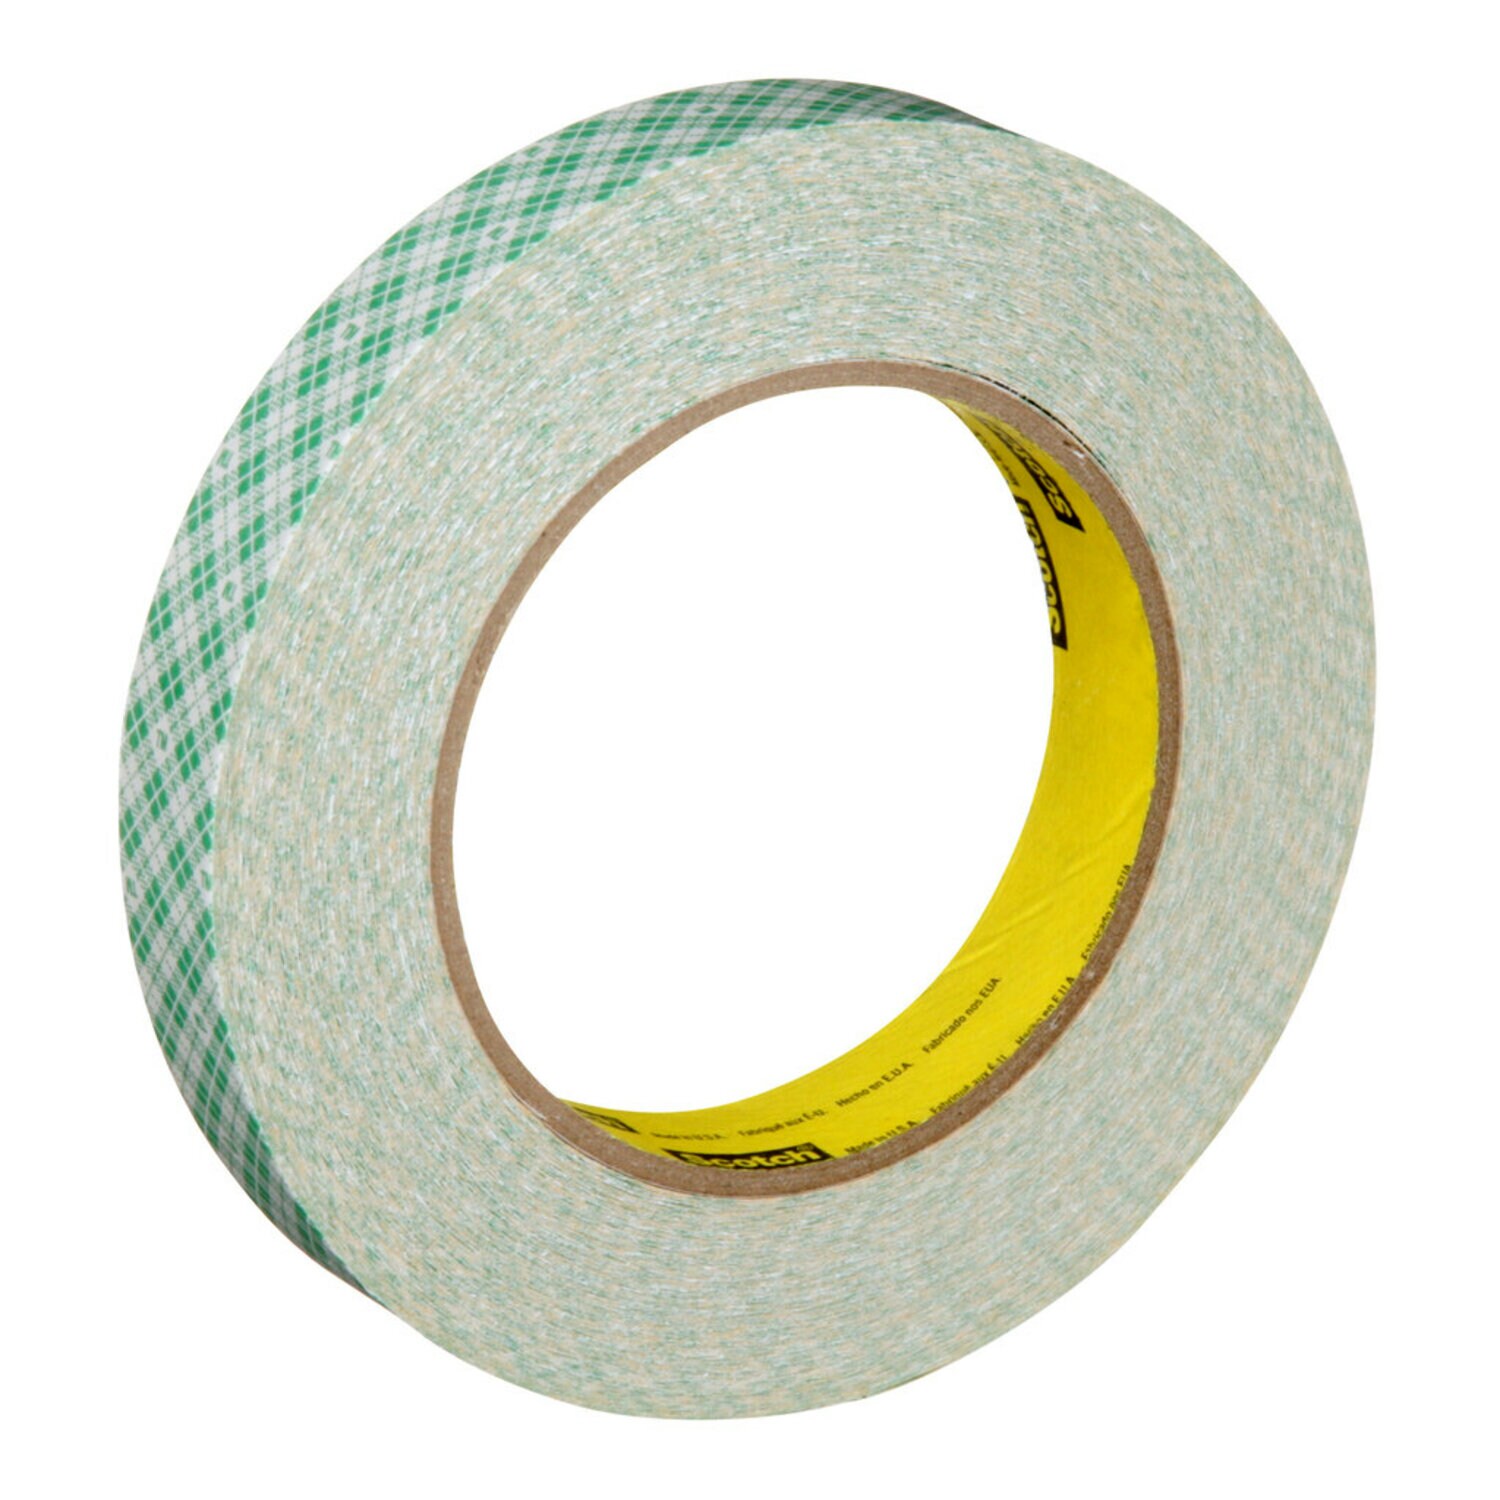  3M 5925 Double Sided Mounting Tape 0.5''x10 Ft 0.6 mm